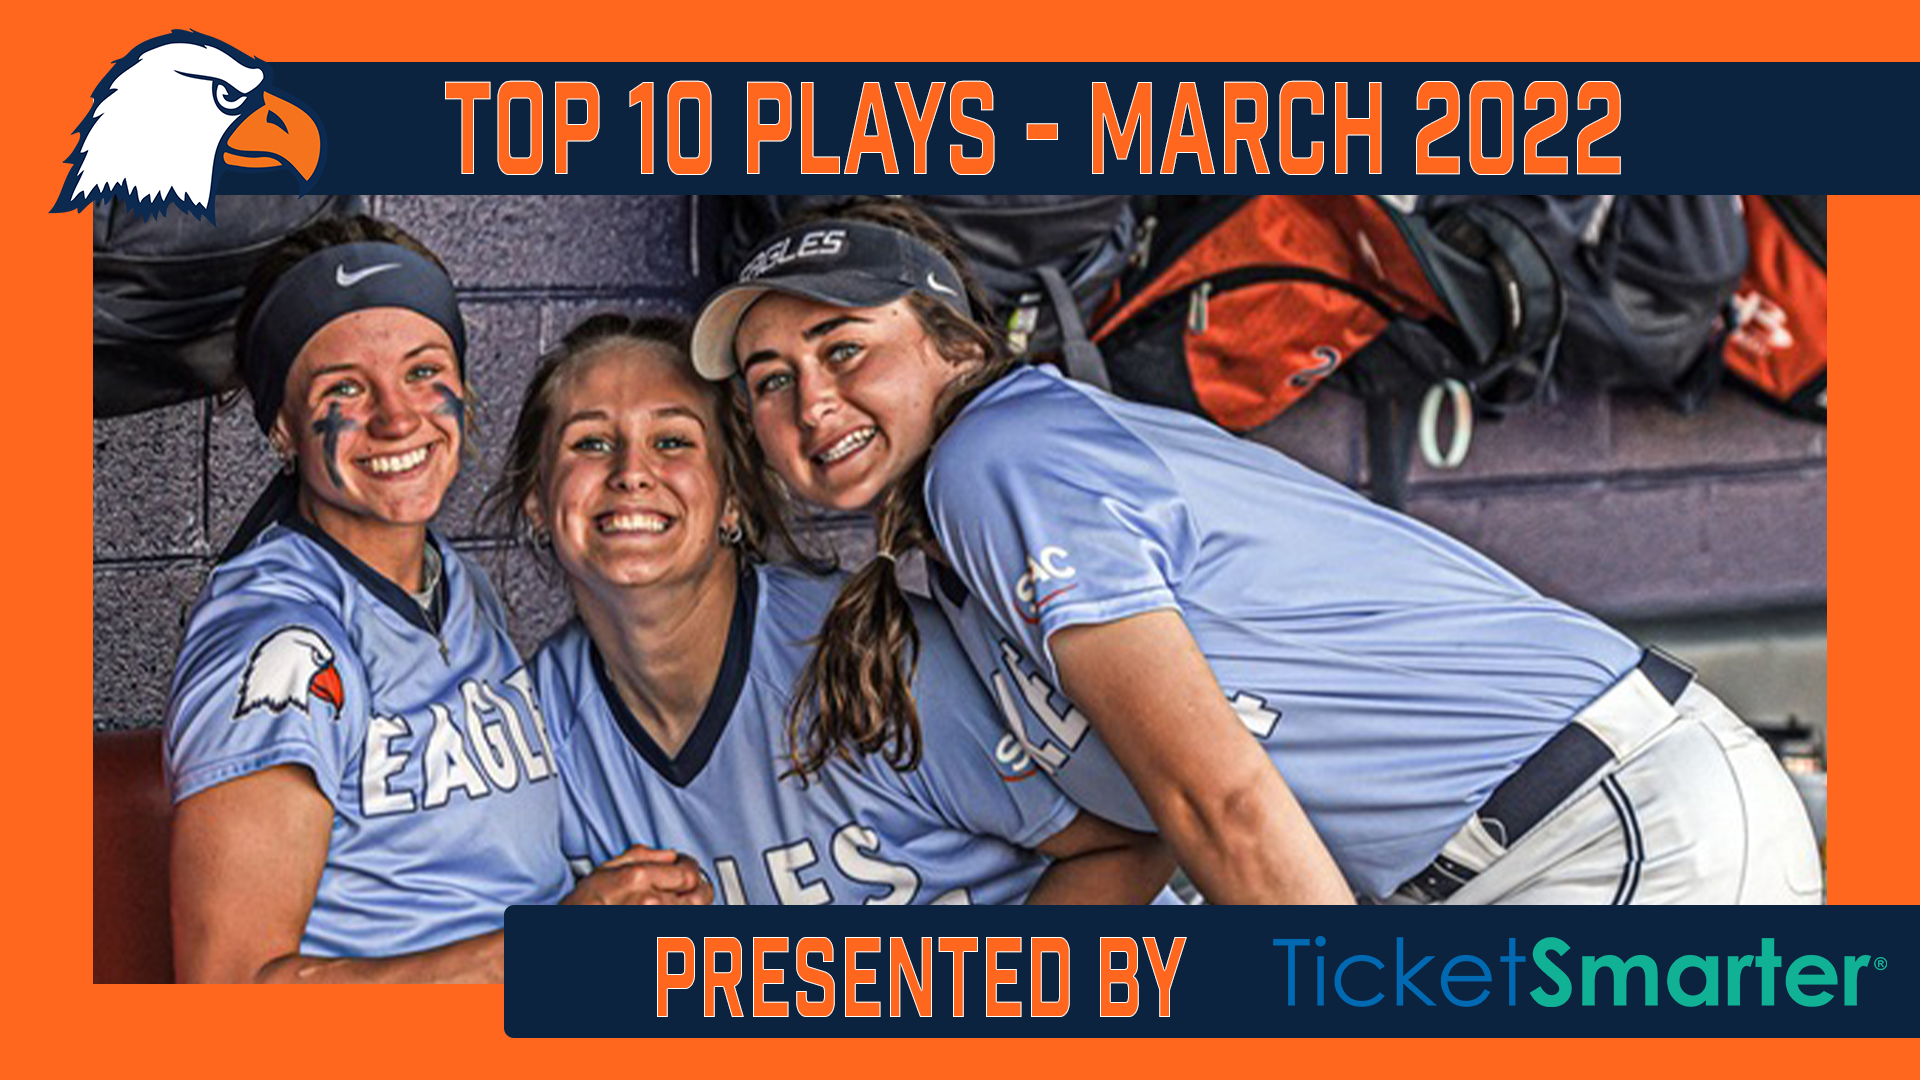 Eagle Sports Network releases top ten plays of March 2022 presented by TicketSmarter